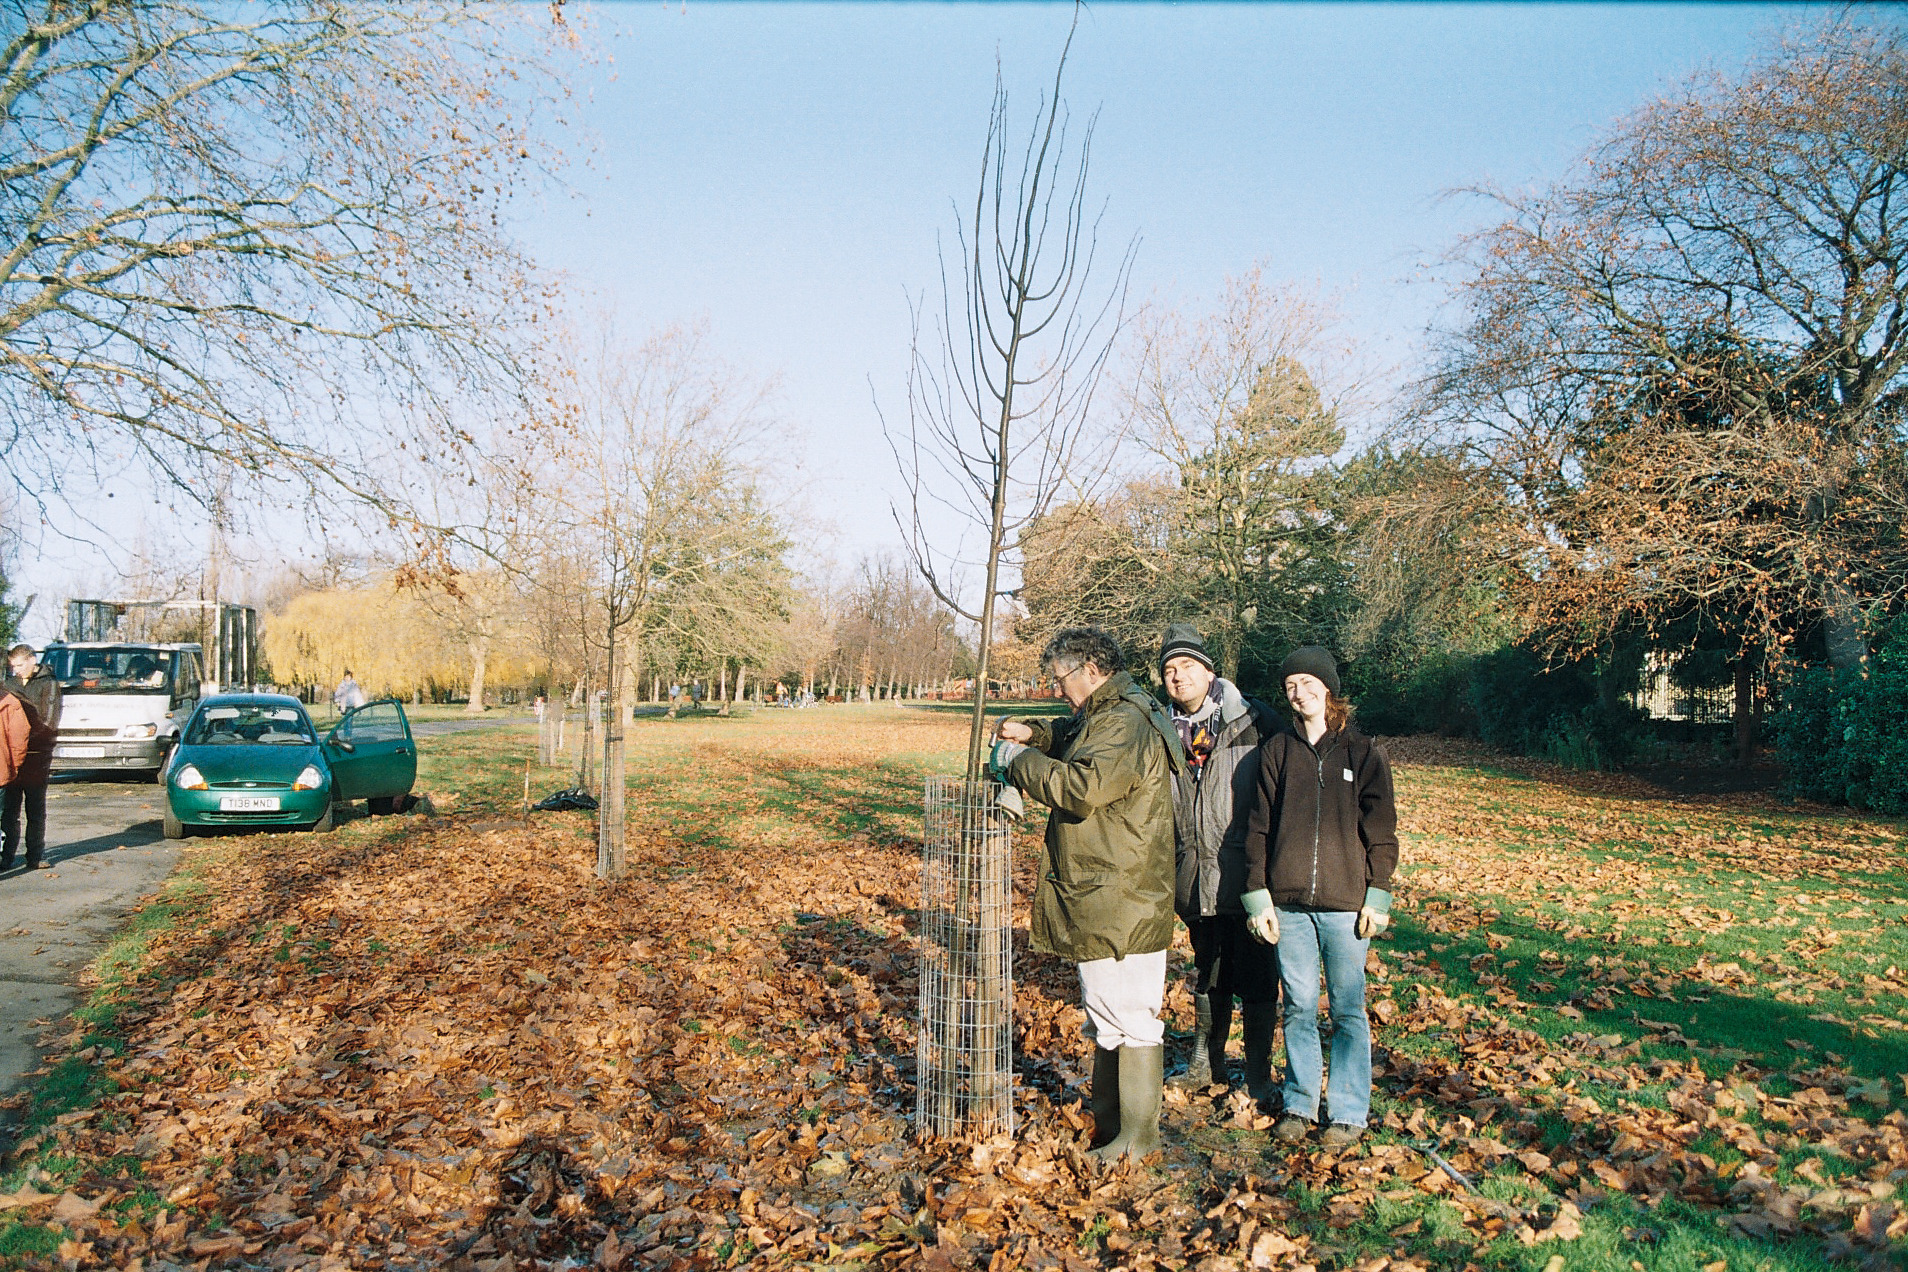 Planting trees in the park on 1 Dec 2007